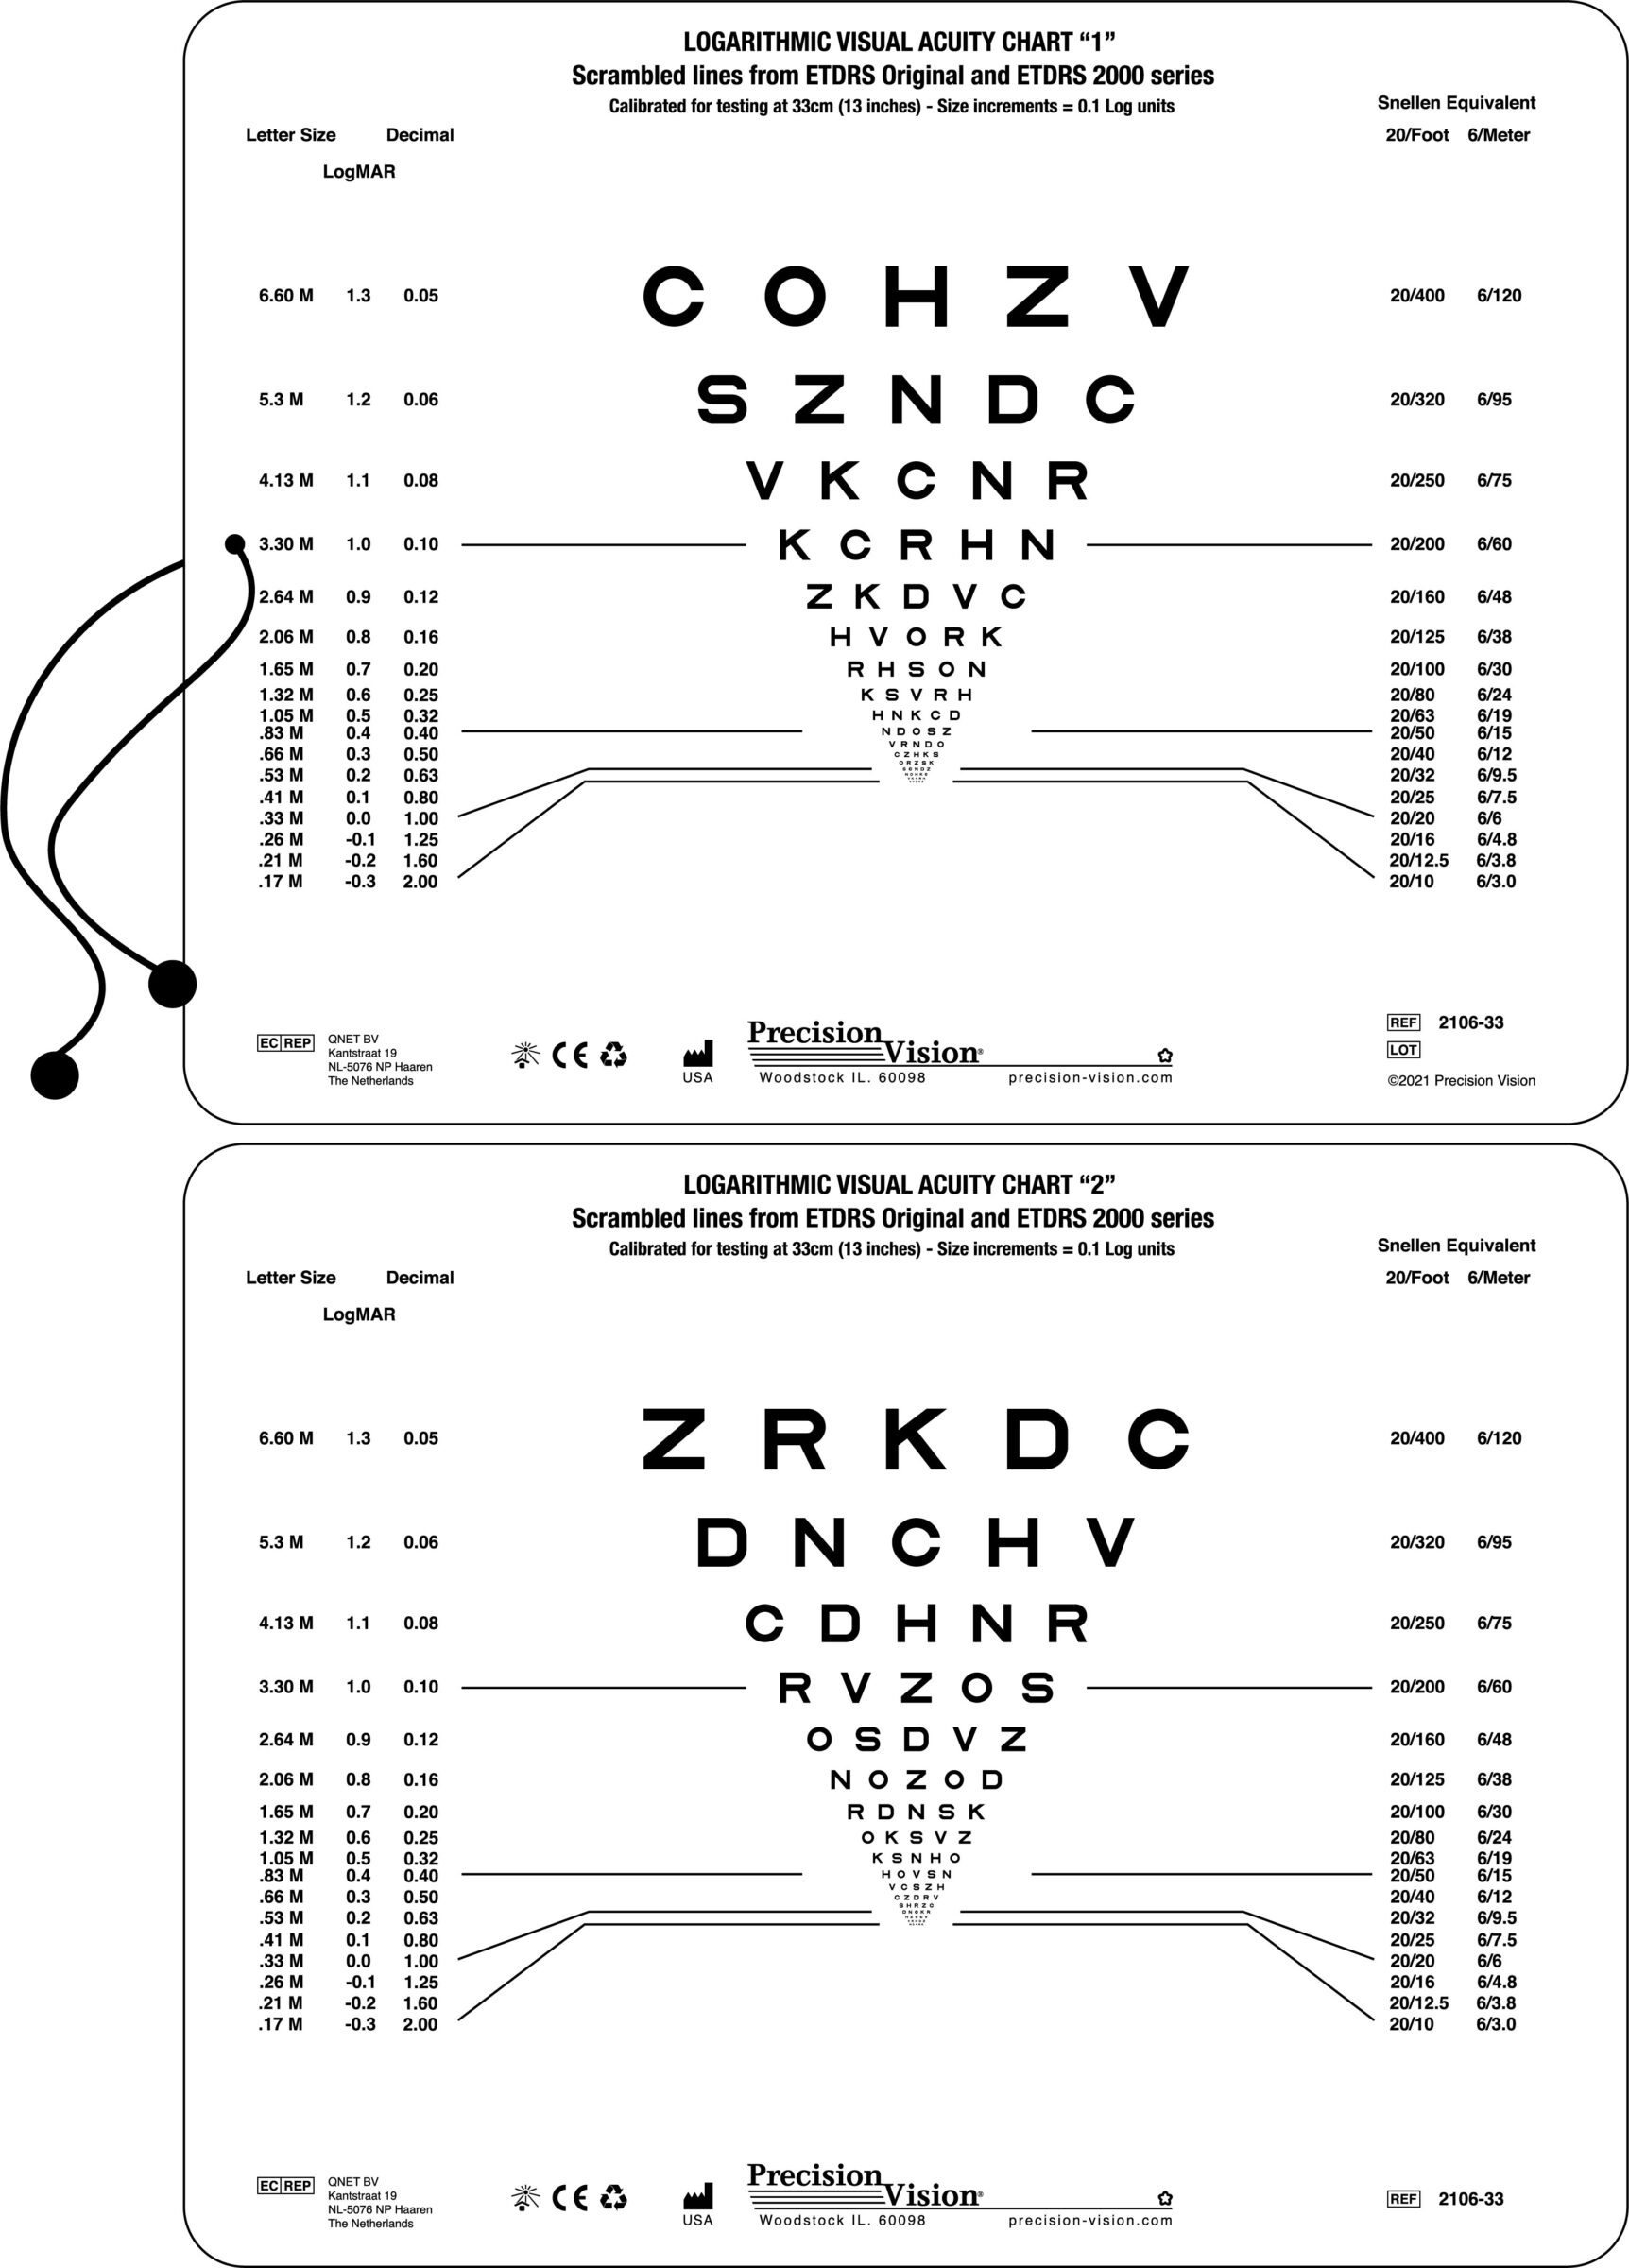 UCanSee E Eye Chart Visual Acuity Chart (22x11 Inches) with Eye Occlud